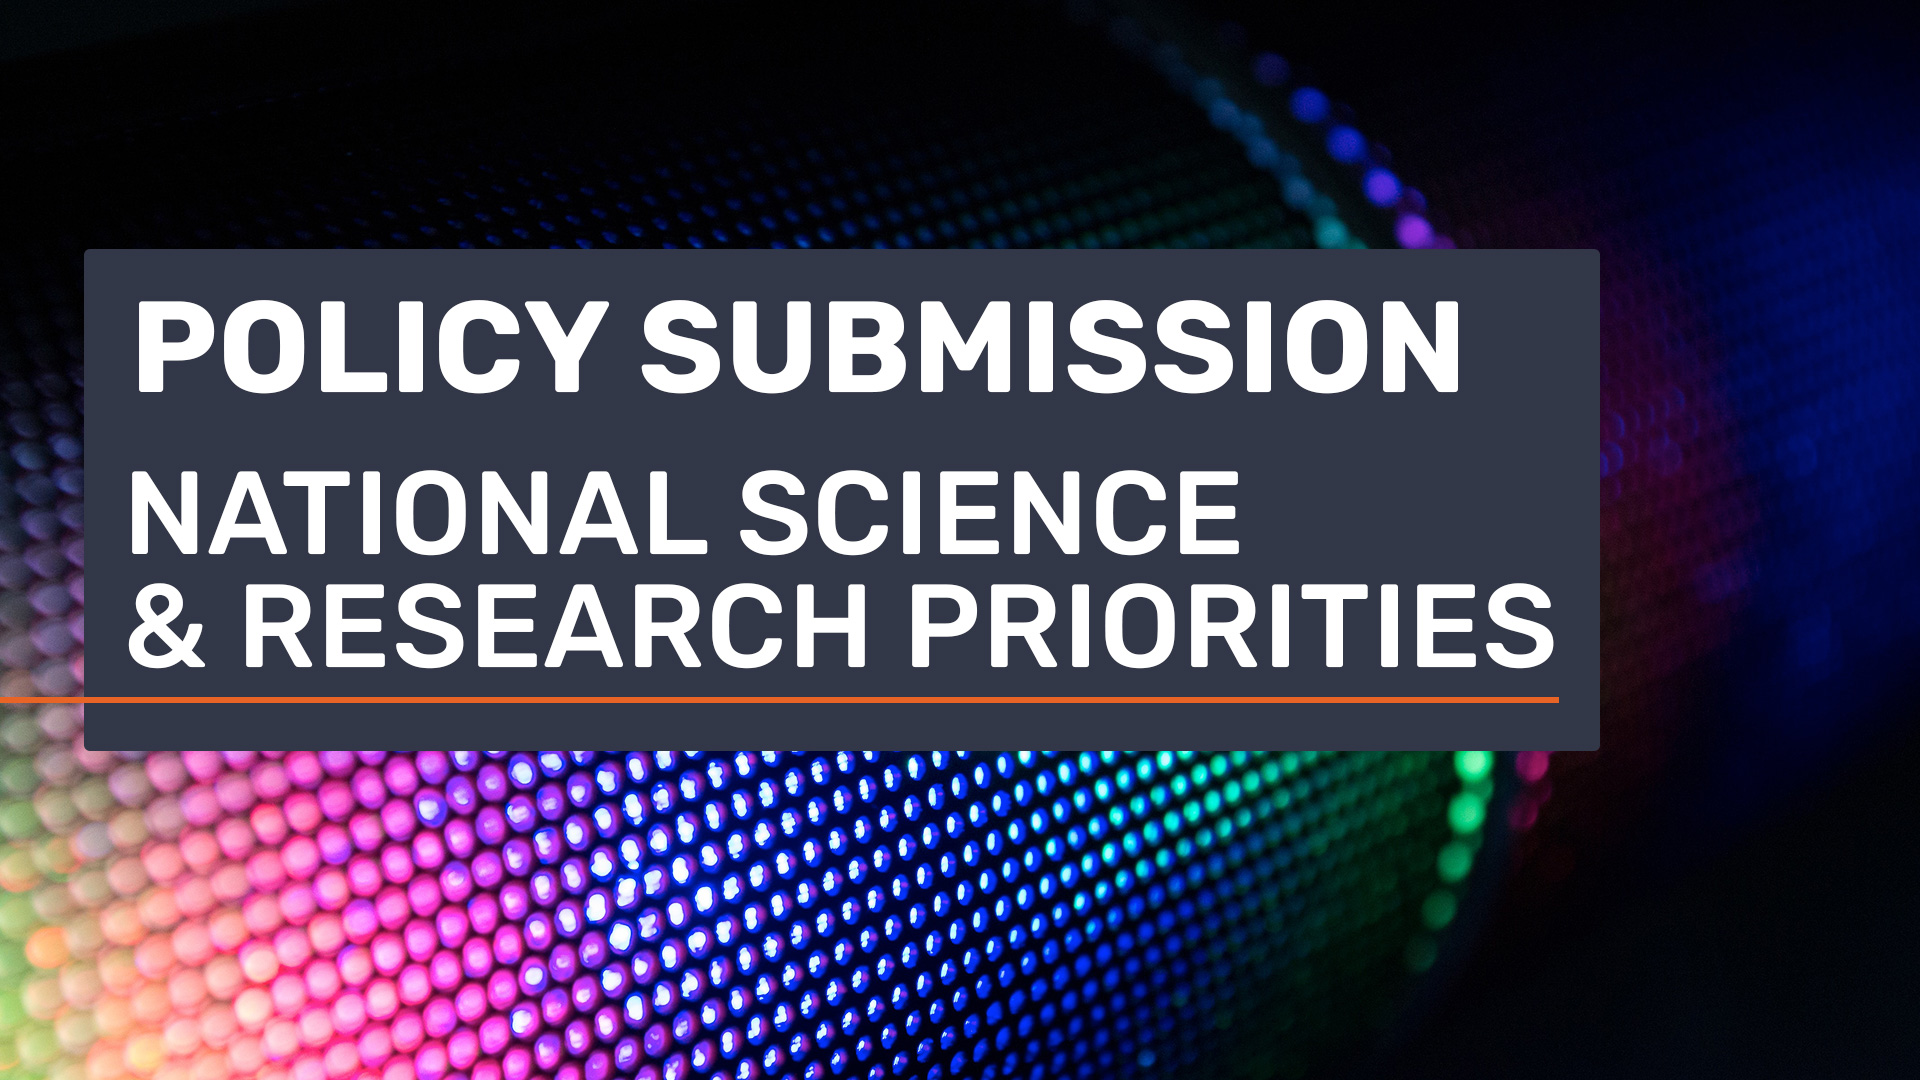 National Science & Research Priorities